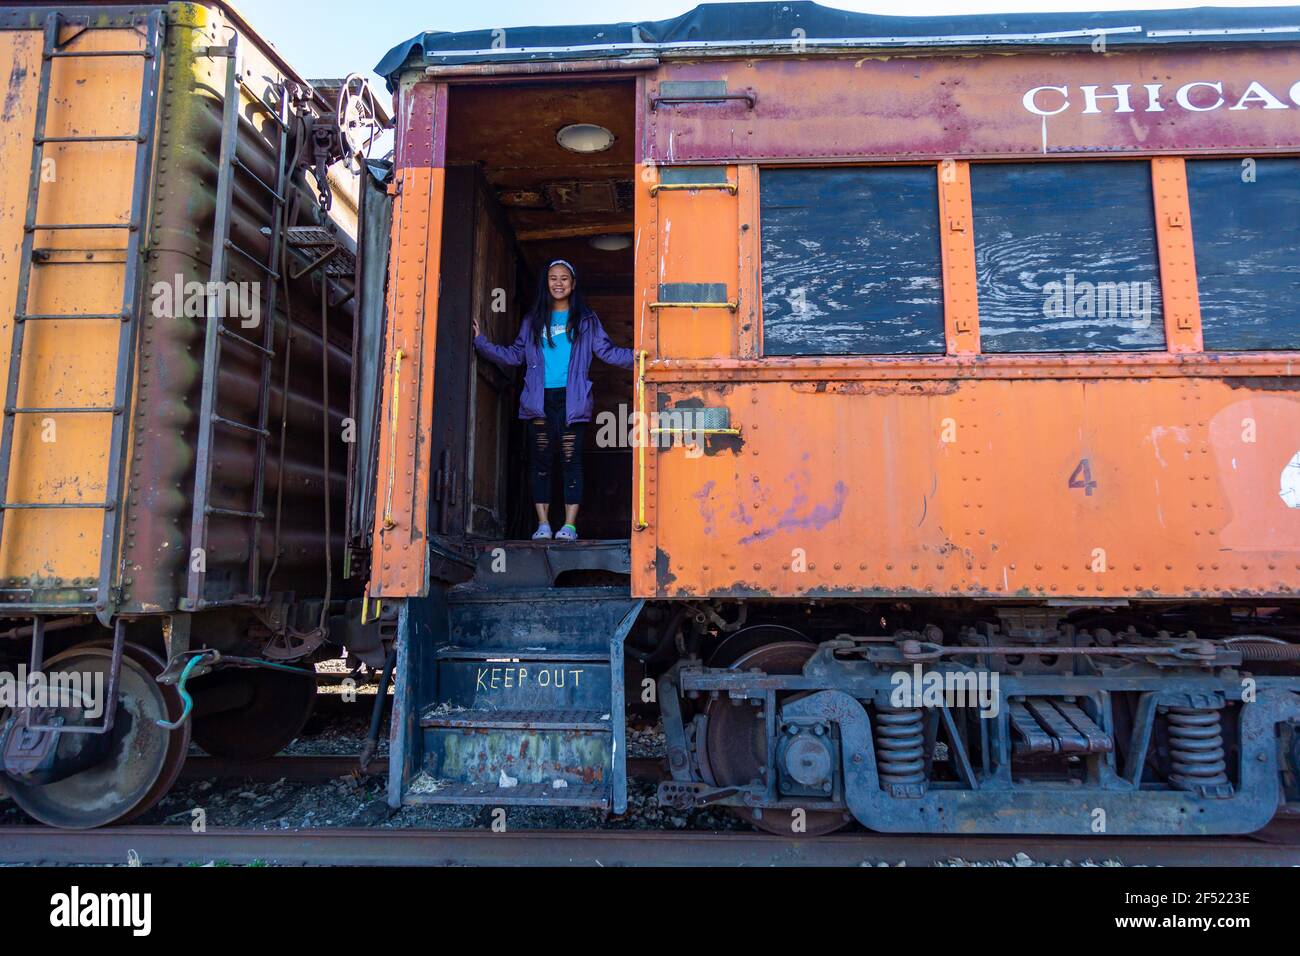 A woman stands at the entry of a Chicago South Shore and South Bend Railroad passenger car at the Hoosier Valley Railroad Museum in N. Judson, Indiana. Stock Photo